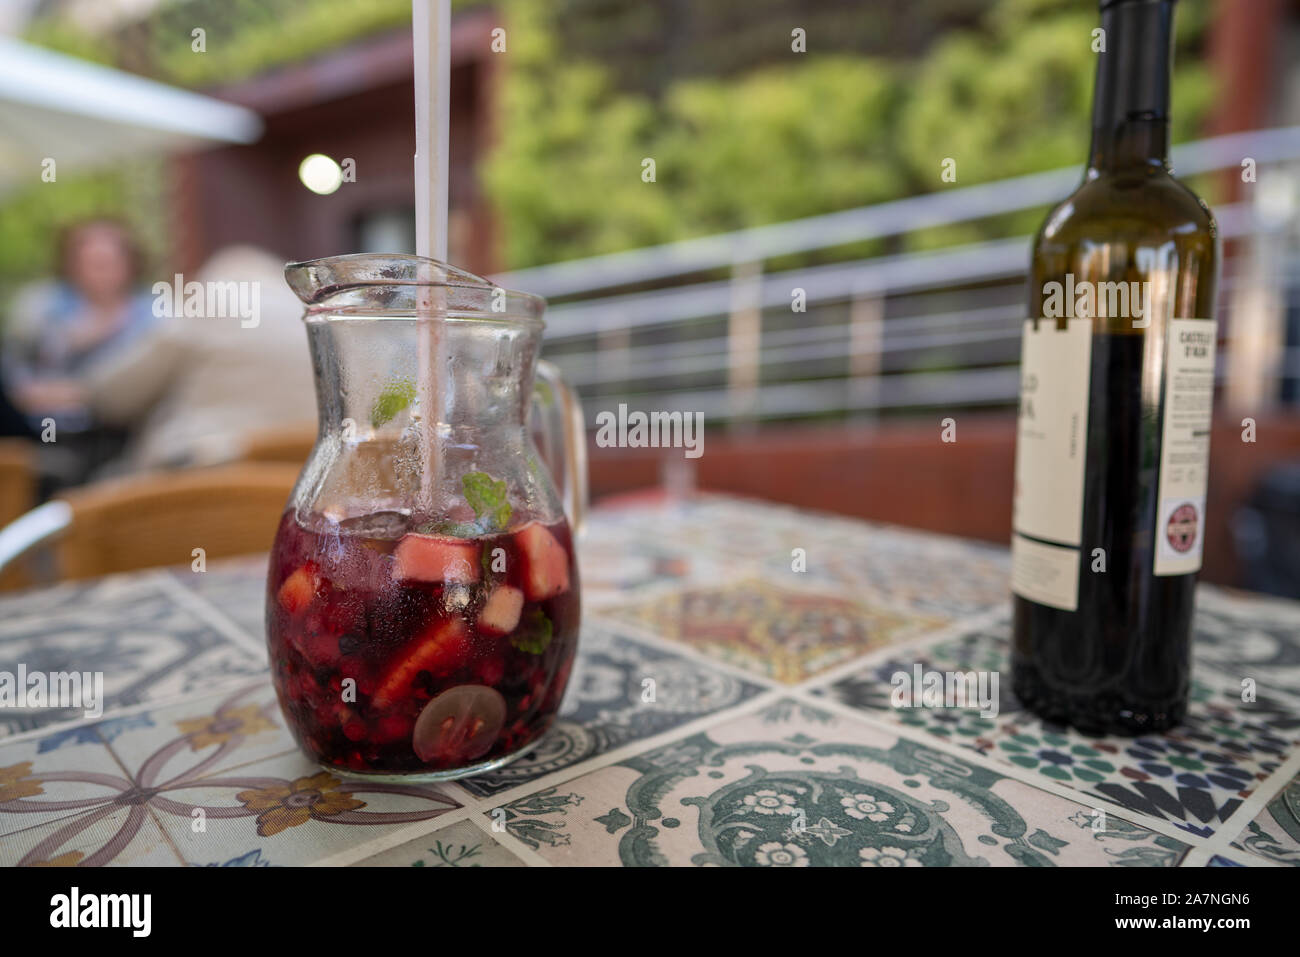 Pitcher of red sangria sitting next to red wine bottle on table at restaurant Stock Photo